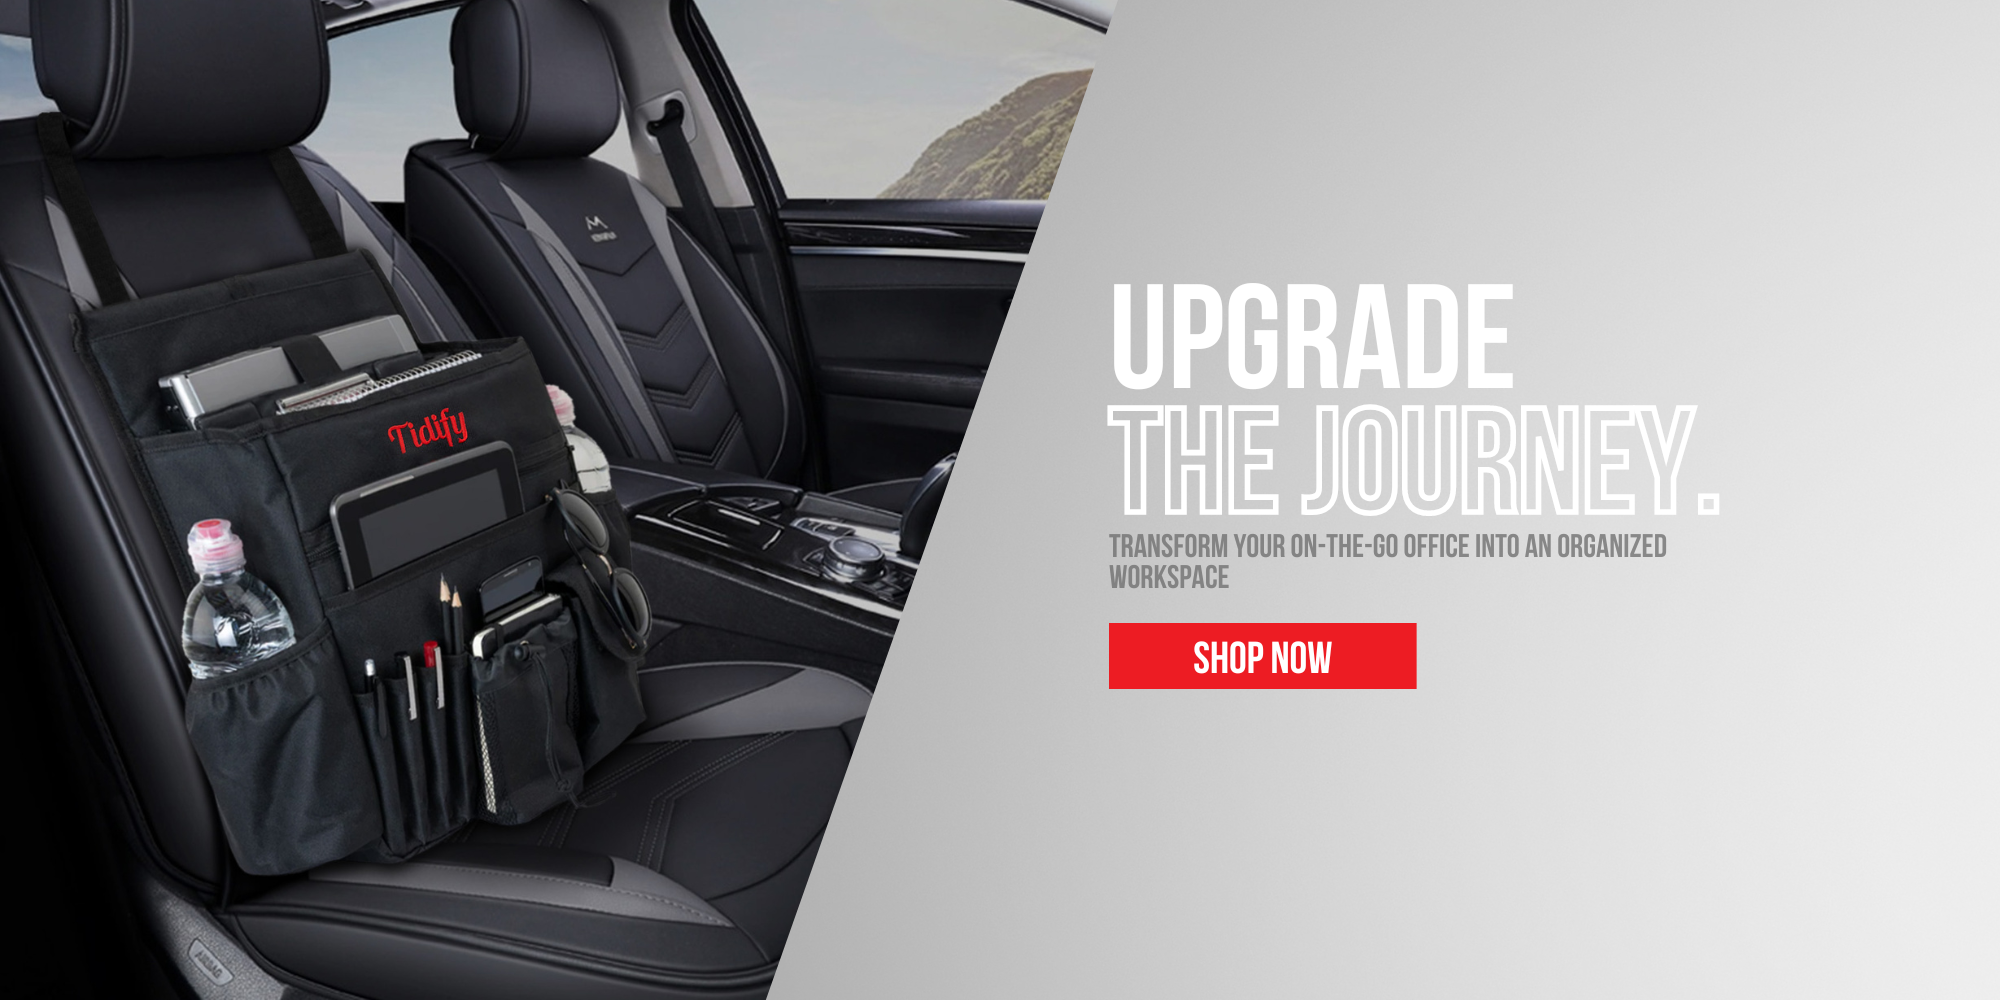 the tidify car seat organizer on a front car seat with the text "upgrade the journey - transform your on-the-go office into an organized workspace"